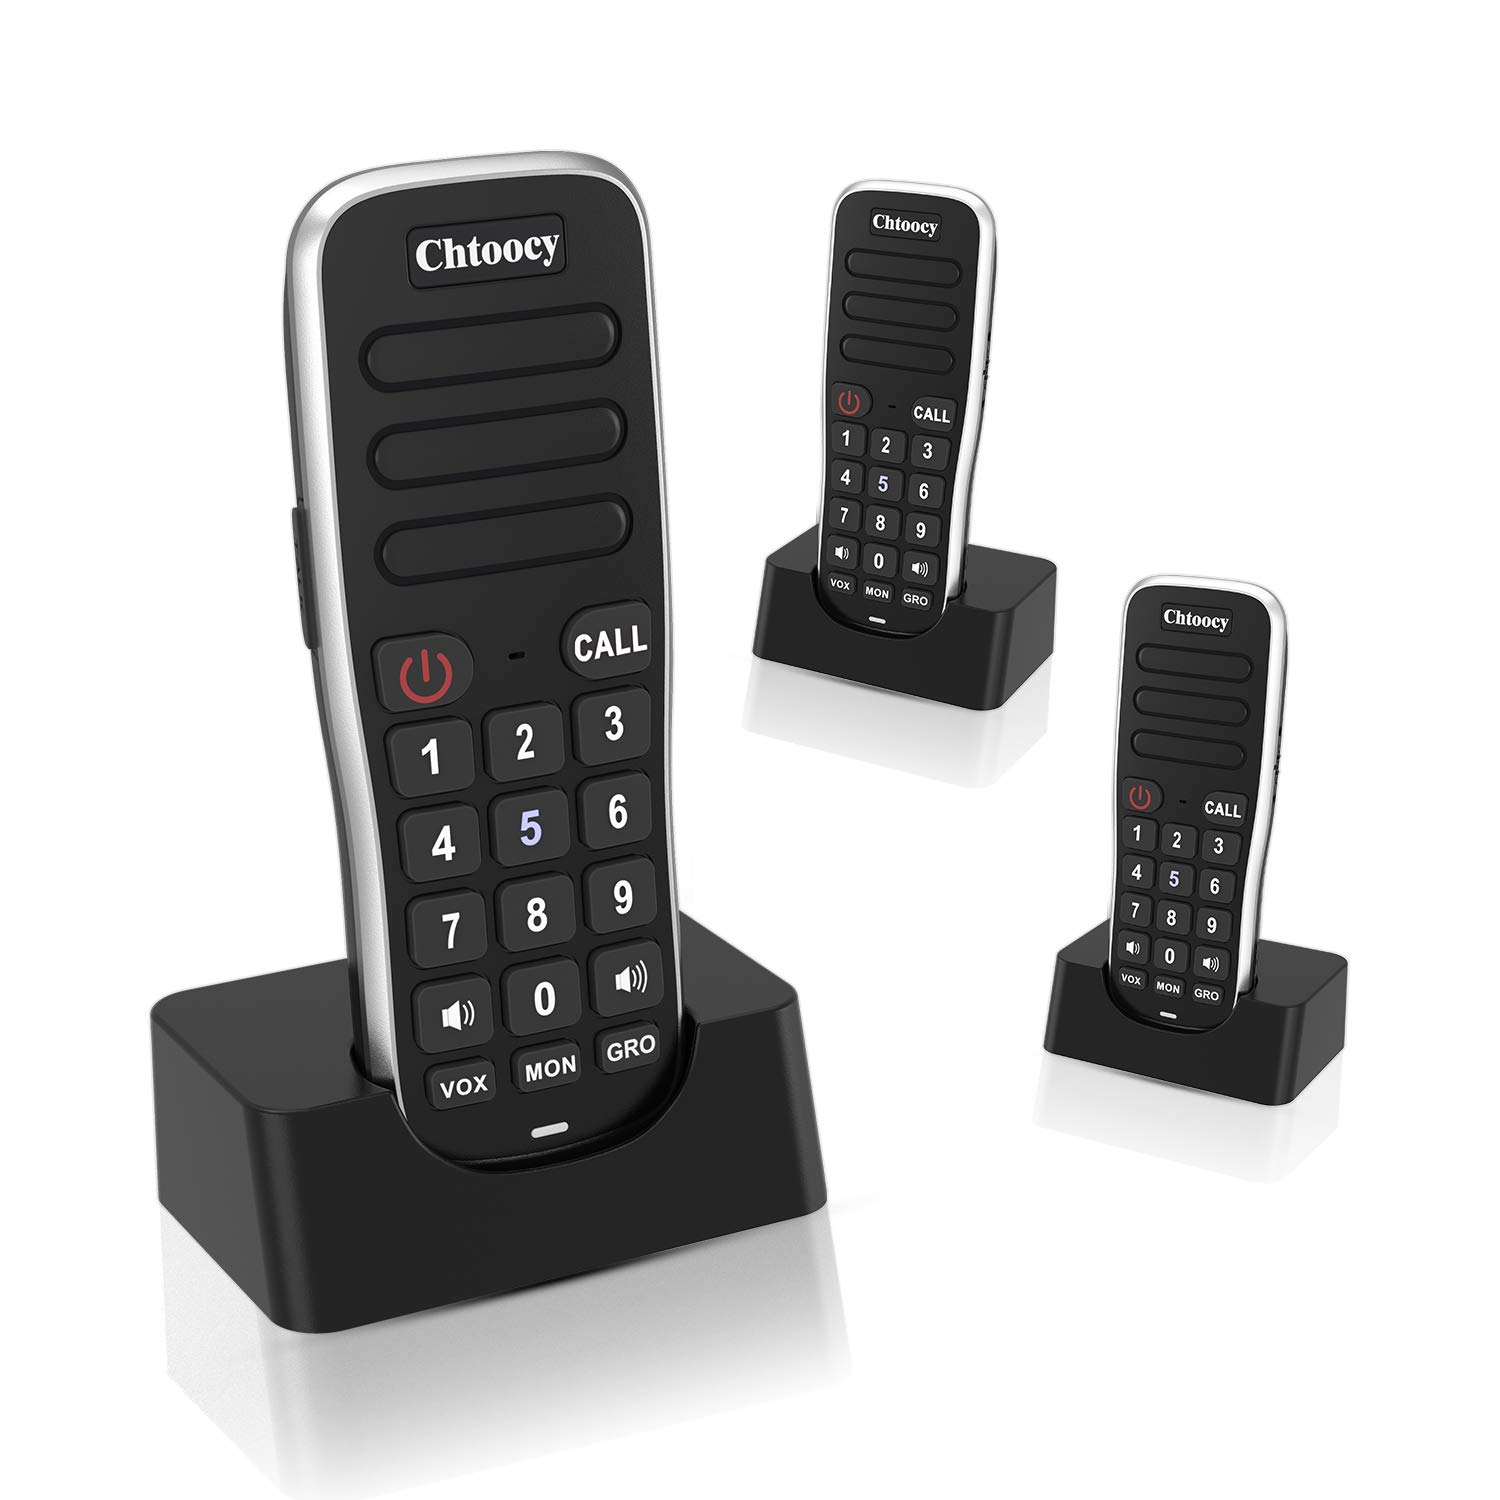 Handheld Intercoms Wireless for Home 1 Mile Range 10 Channel, Chtoocy Rechargeable Wireless Intercom System for Home Business Office, Home Room to ...